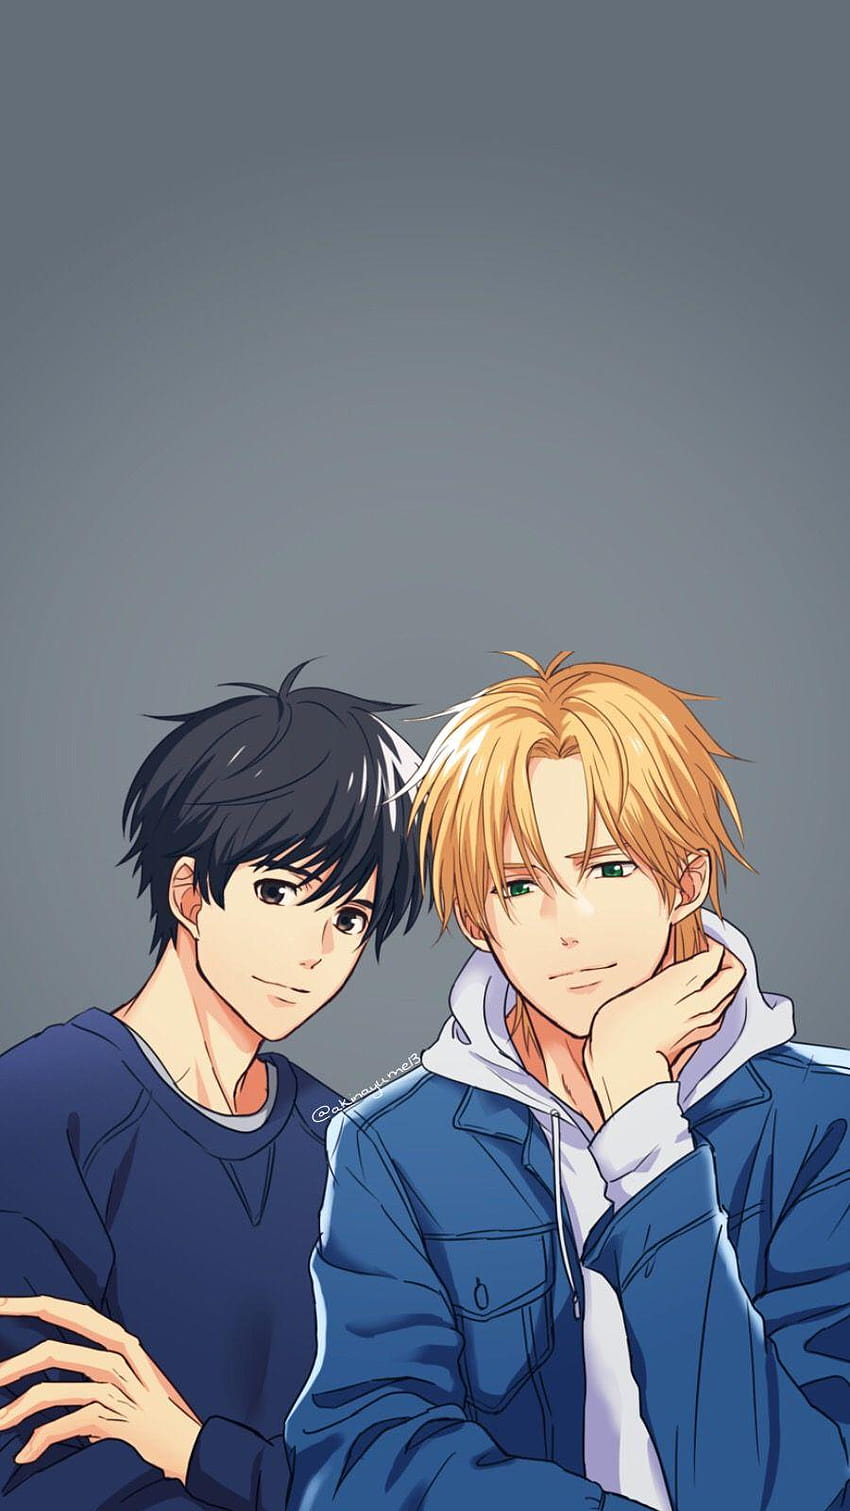 Banana Fish: The BL Gangs of New York – OTAQUEST